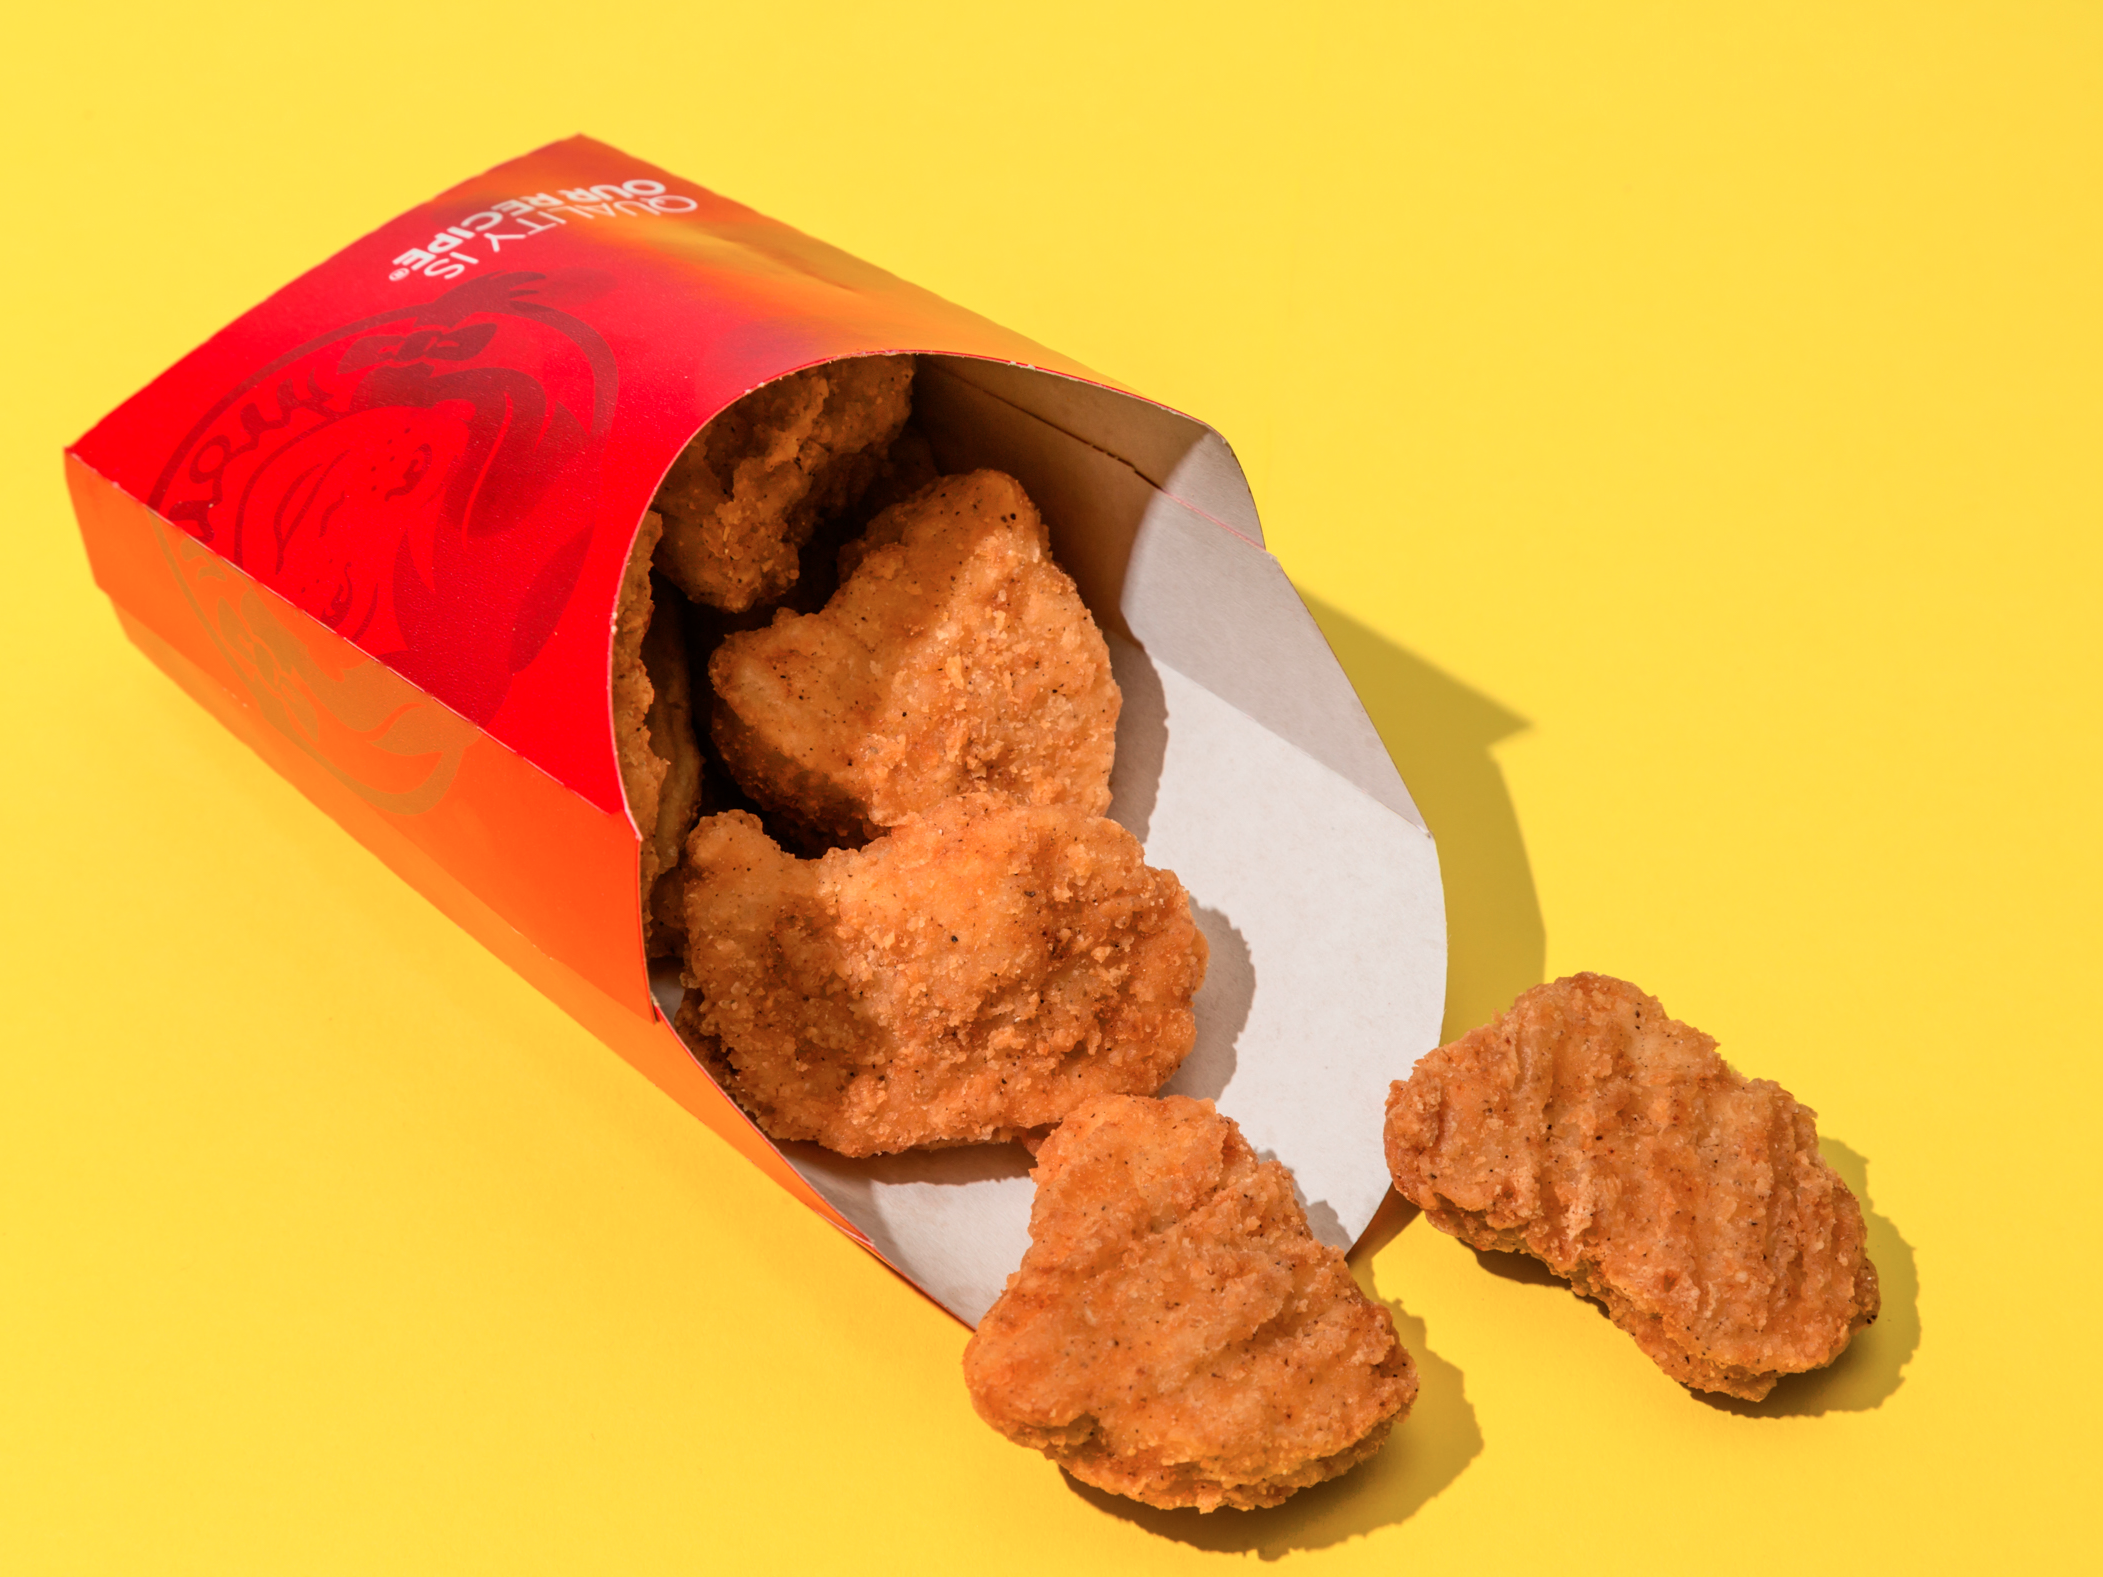 Free Wendy's chicken nuggets for a year?